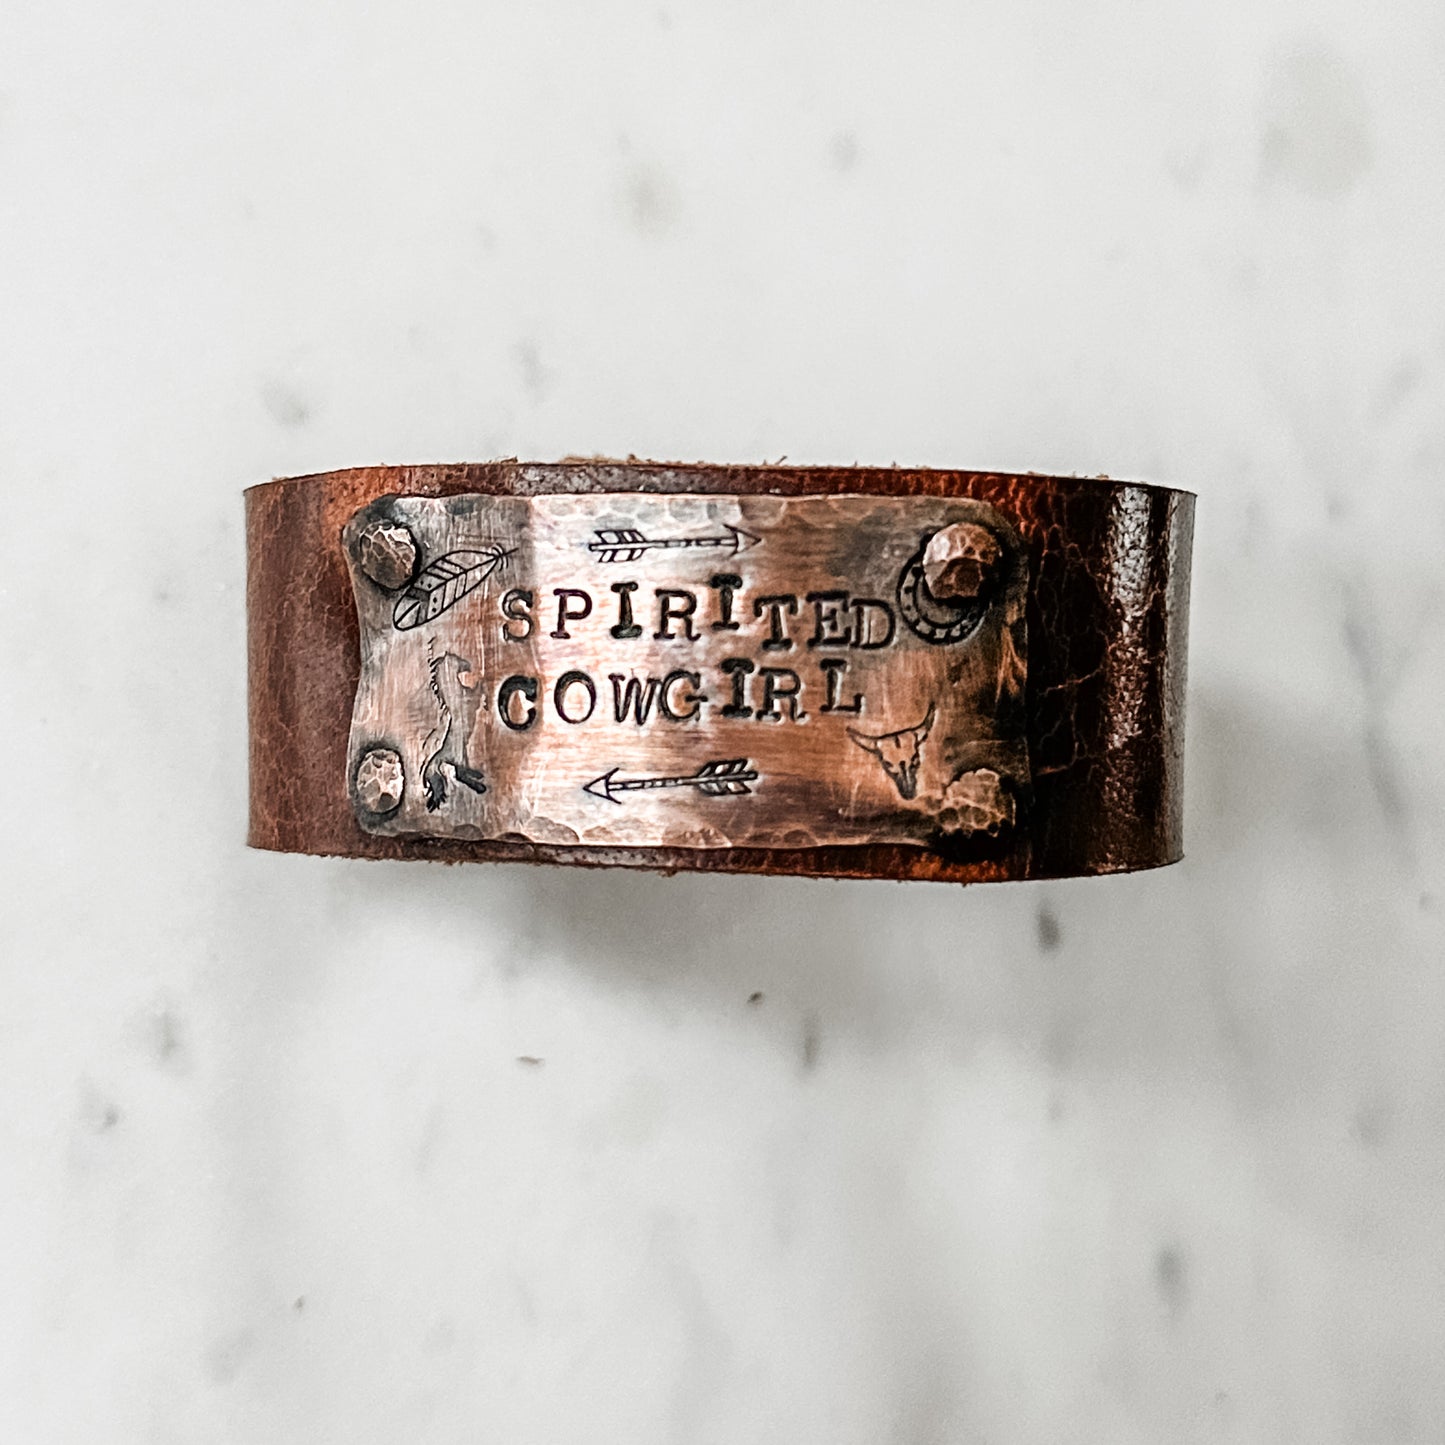 Spirited Cowgirl Leather Bracelet -Handmade Jewelry for Bourbon Cowgirl